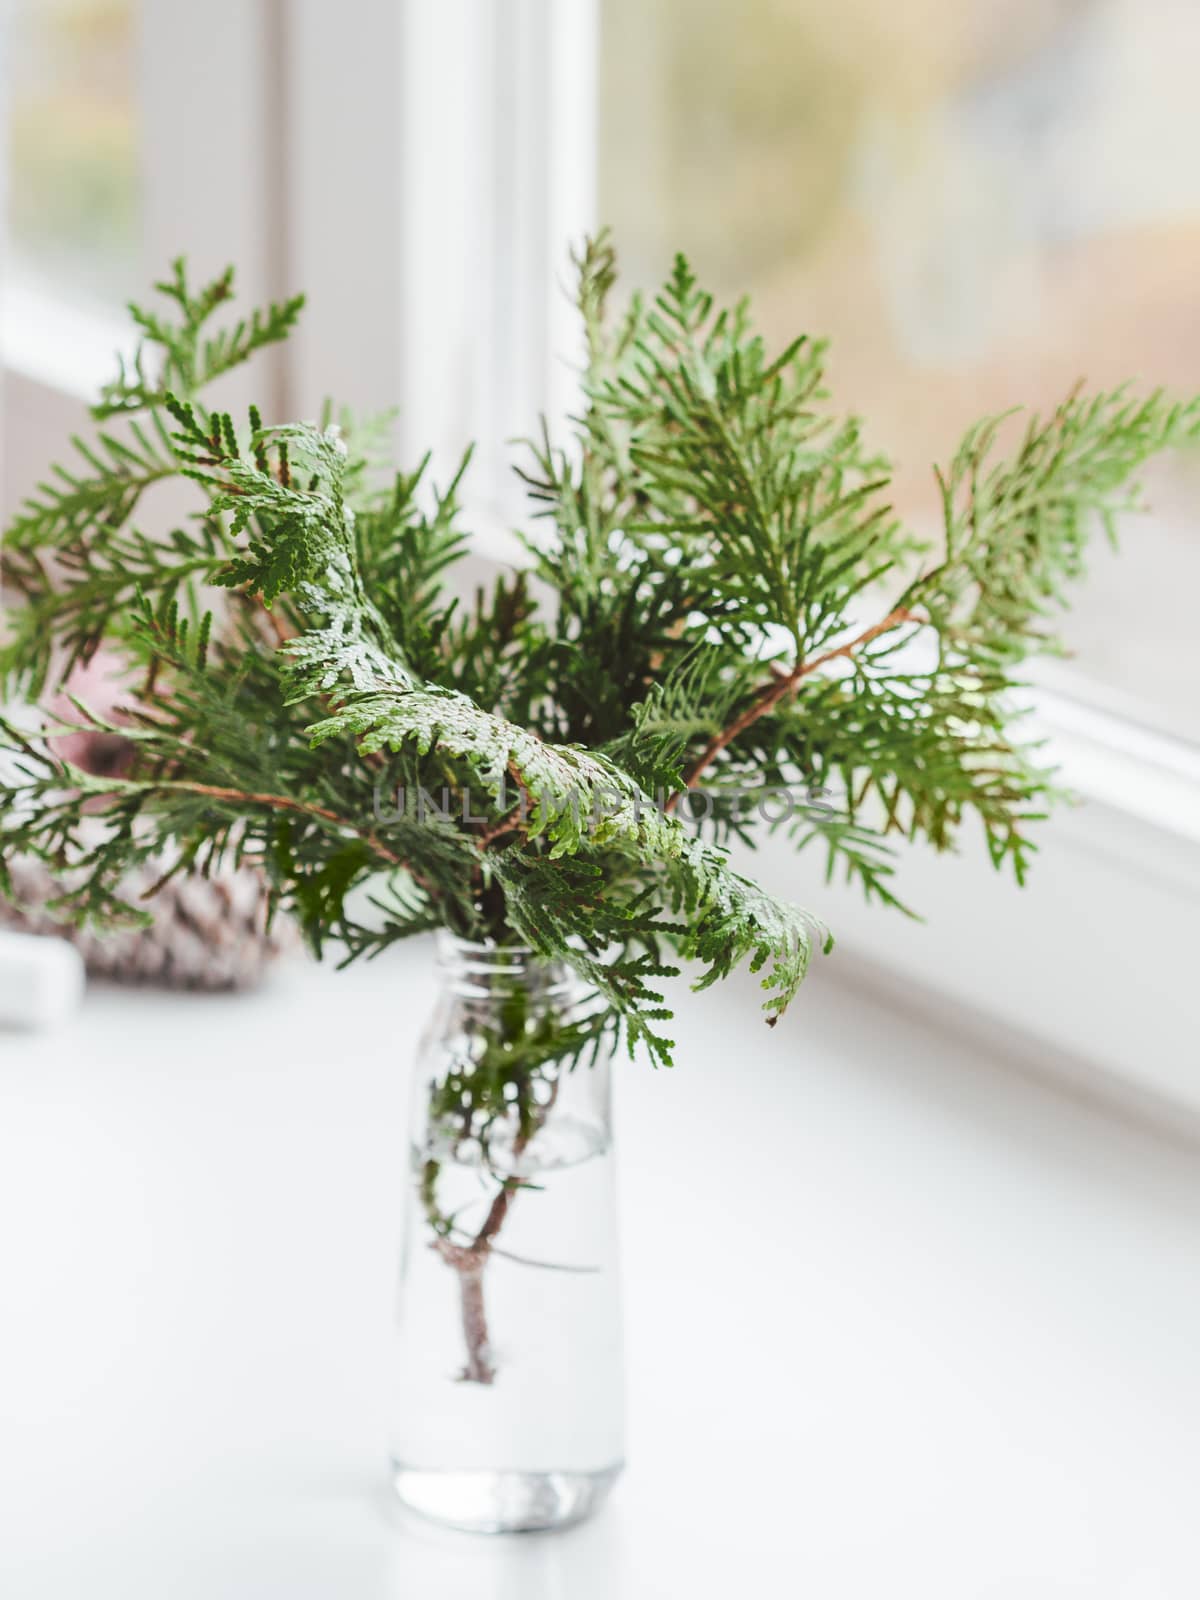 Vase with thuja branches stands on window sill. Sustainable alternative for Christmas tree. Caring for nature. Refusal to cut down spruce forests. New Year celebration. by aksenovko